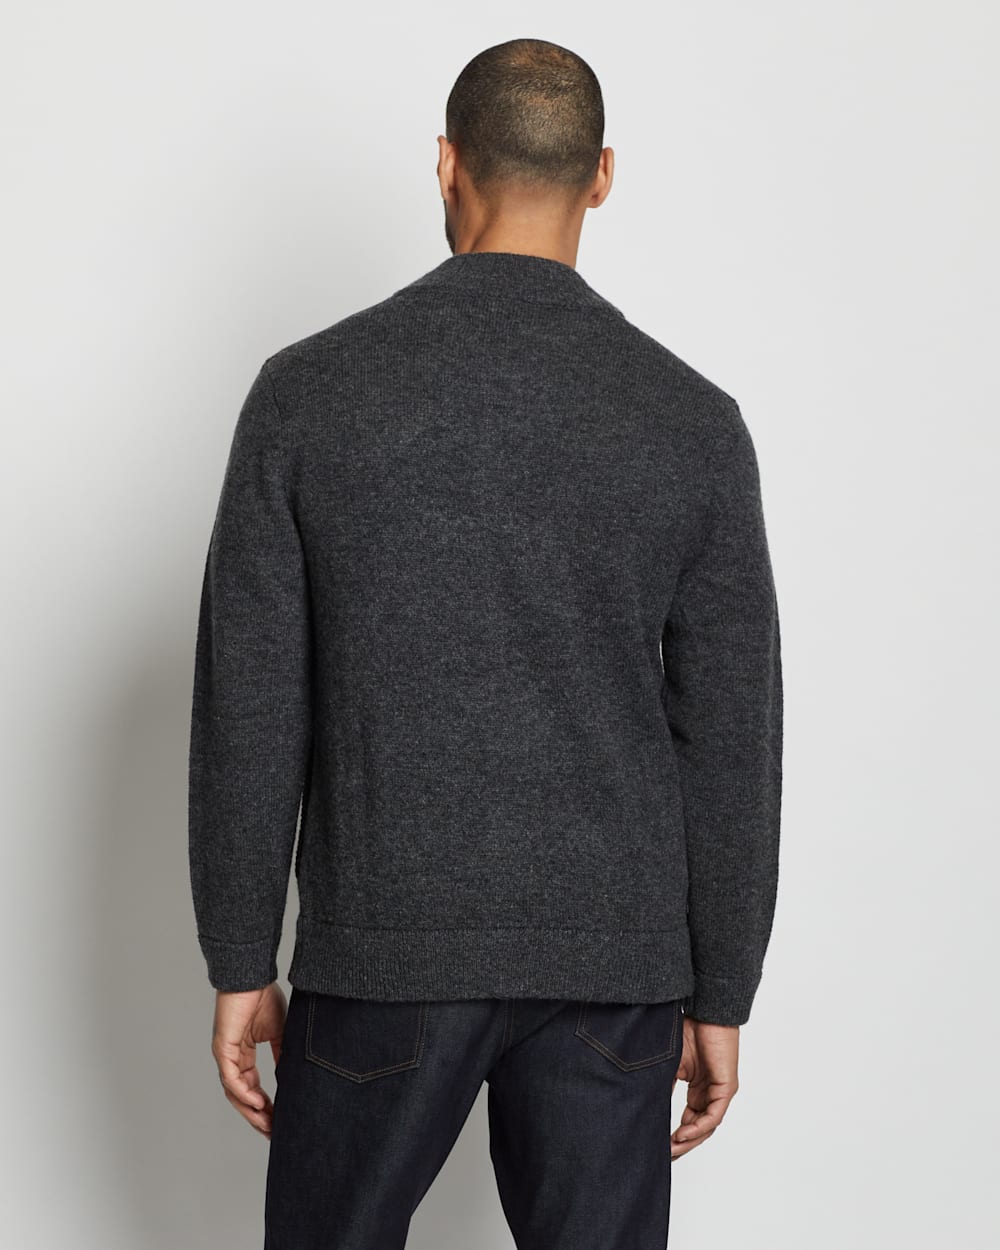 ALTERNATE VIEW OF MEN'S SHETLAND WASHABLE WOOL CARDIGAN IN CHARCOAL image number 4